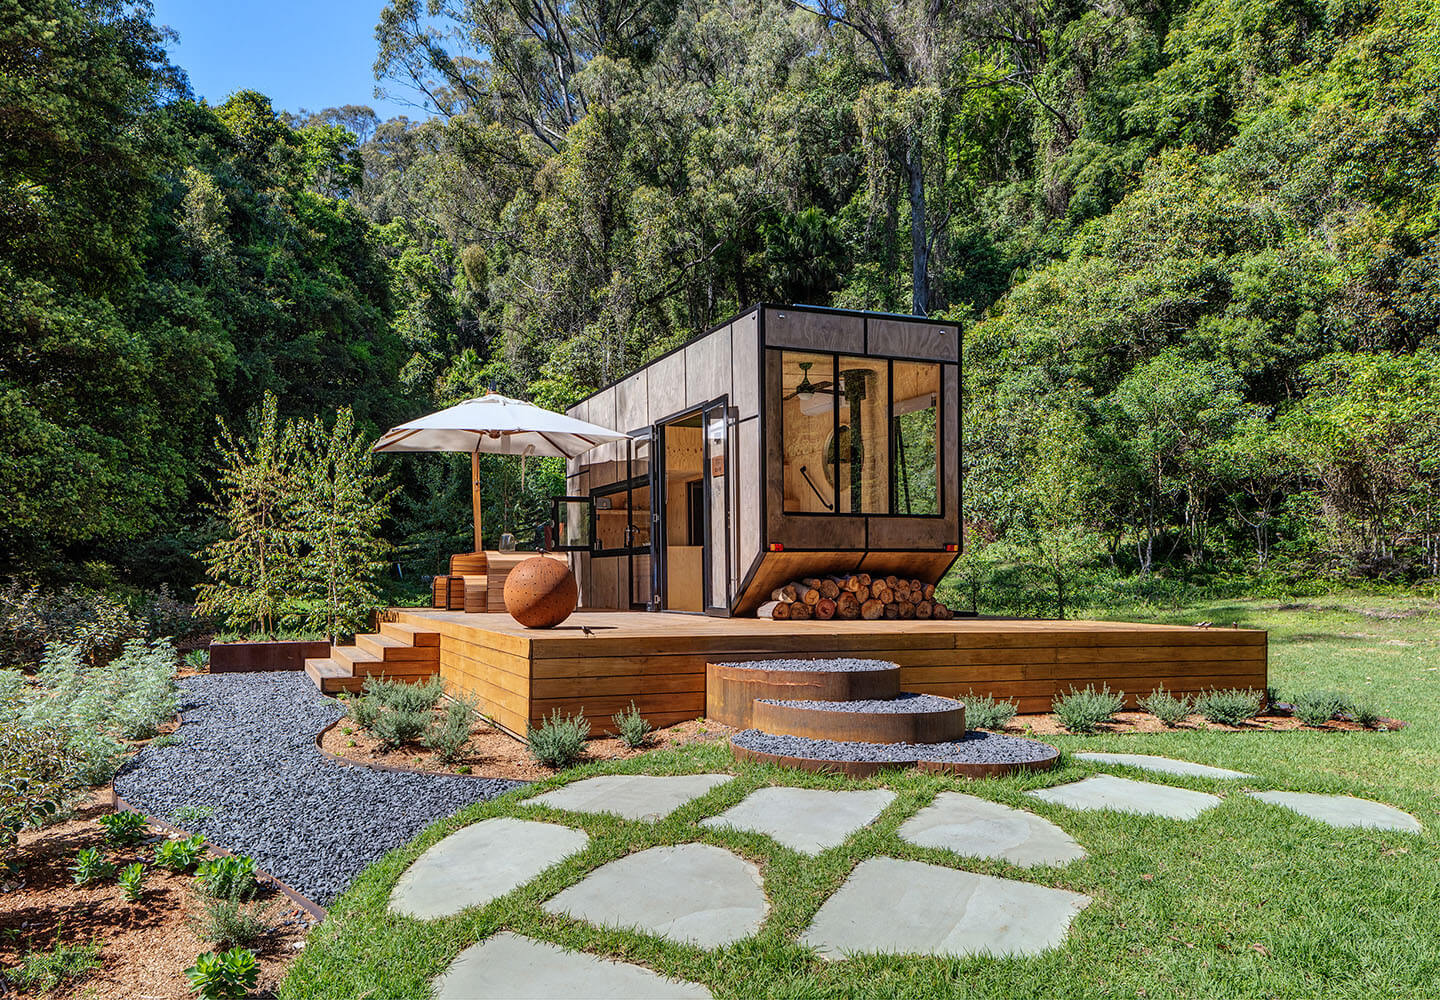 kangaroo_valley_madeline_blanchford_architects_manwarring_architectural_photography_murray_fredericks